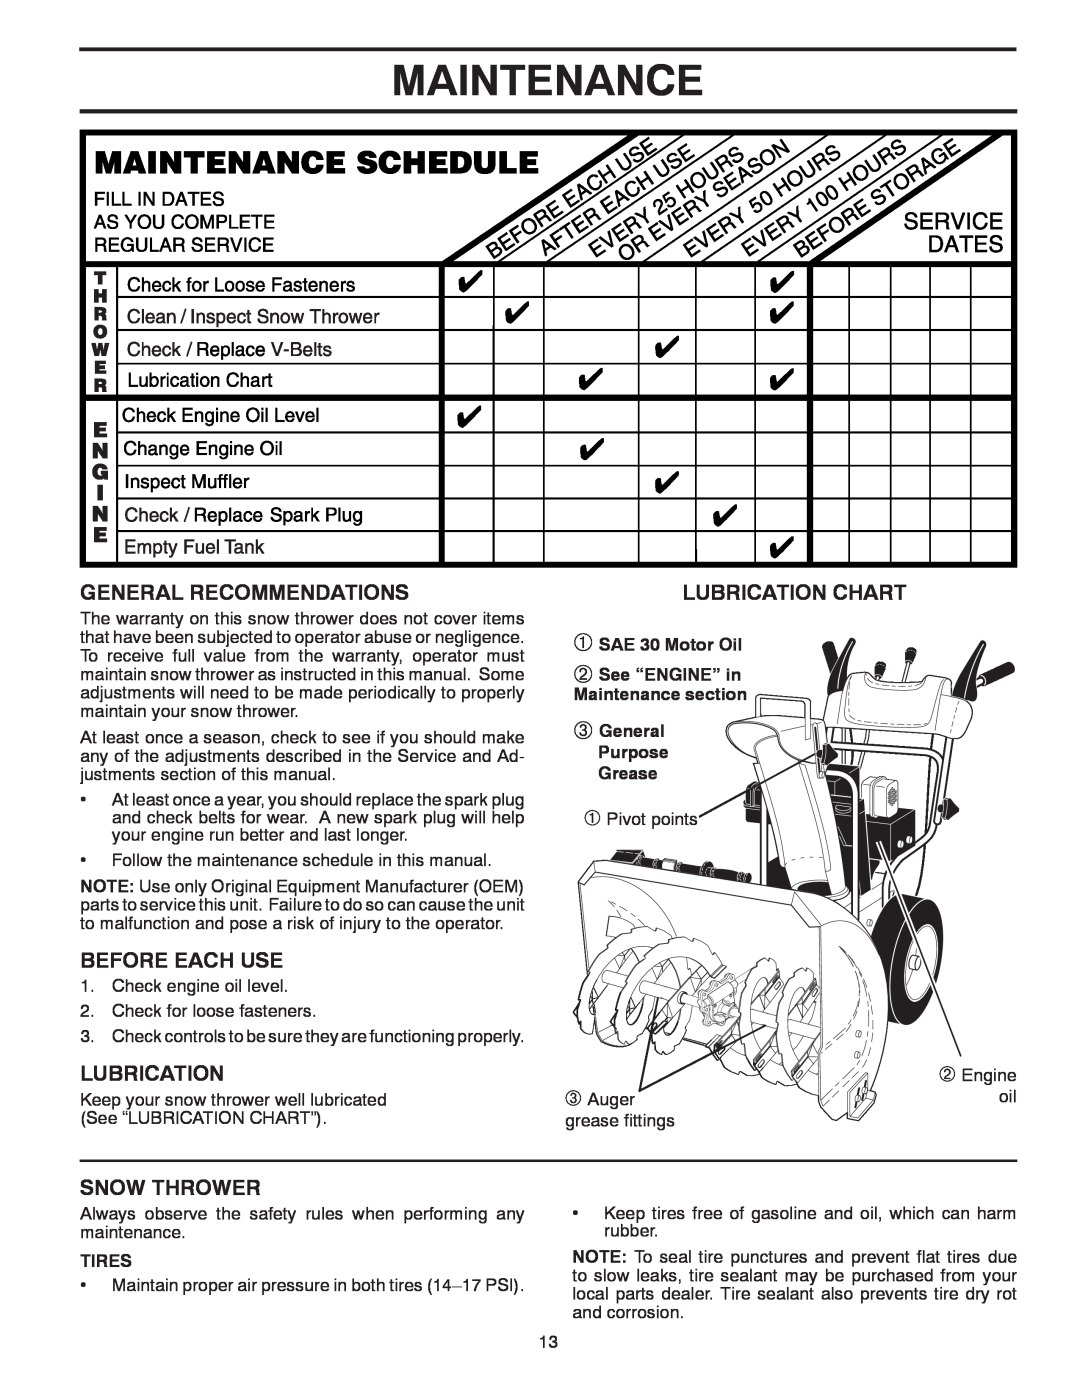 Poulan 96198002603, 435562 Maintenance, General Recommendations, Before Each Use, Snow Thrower, Lubrication Chart 